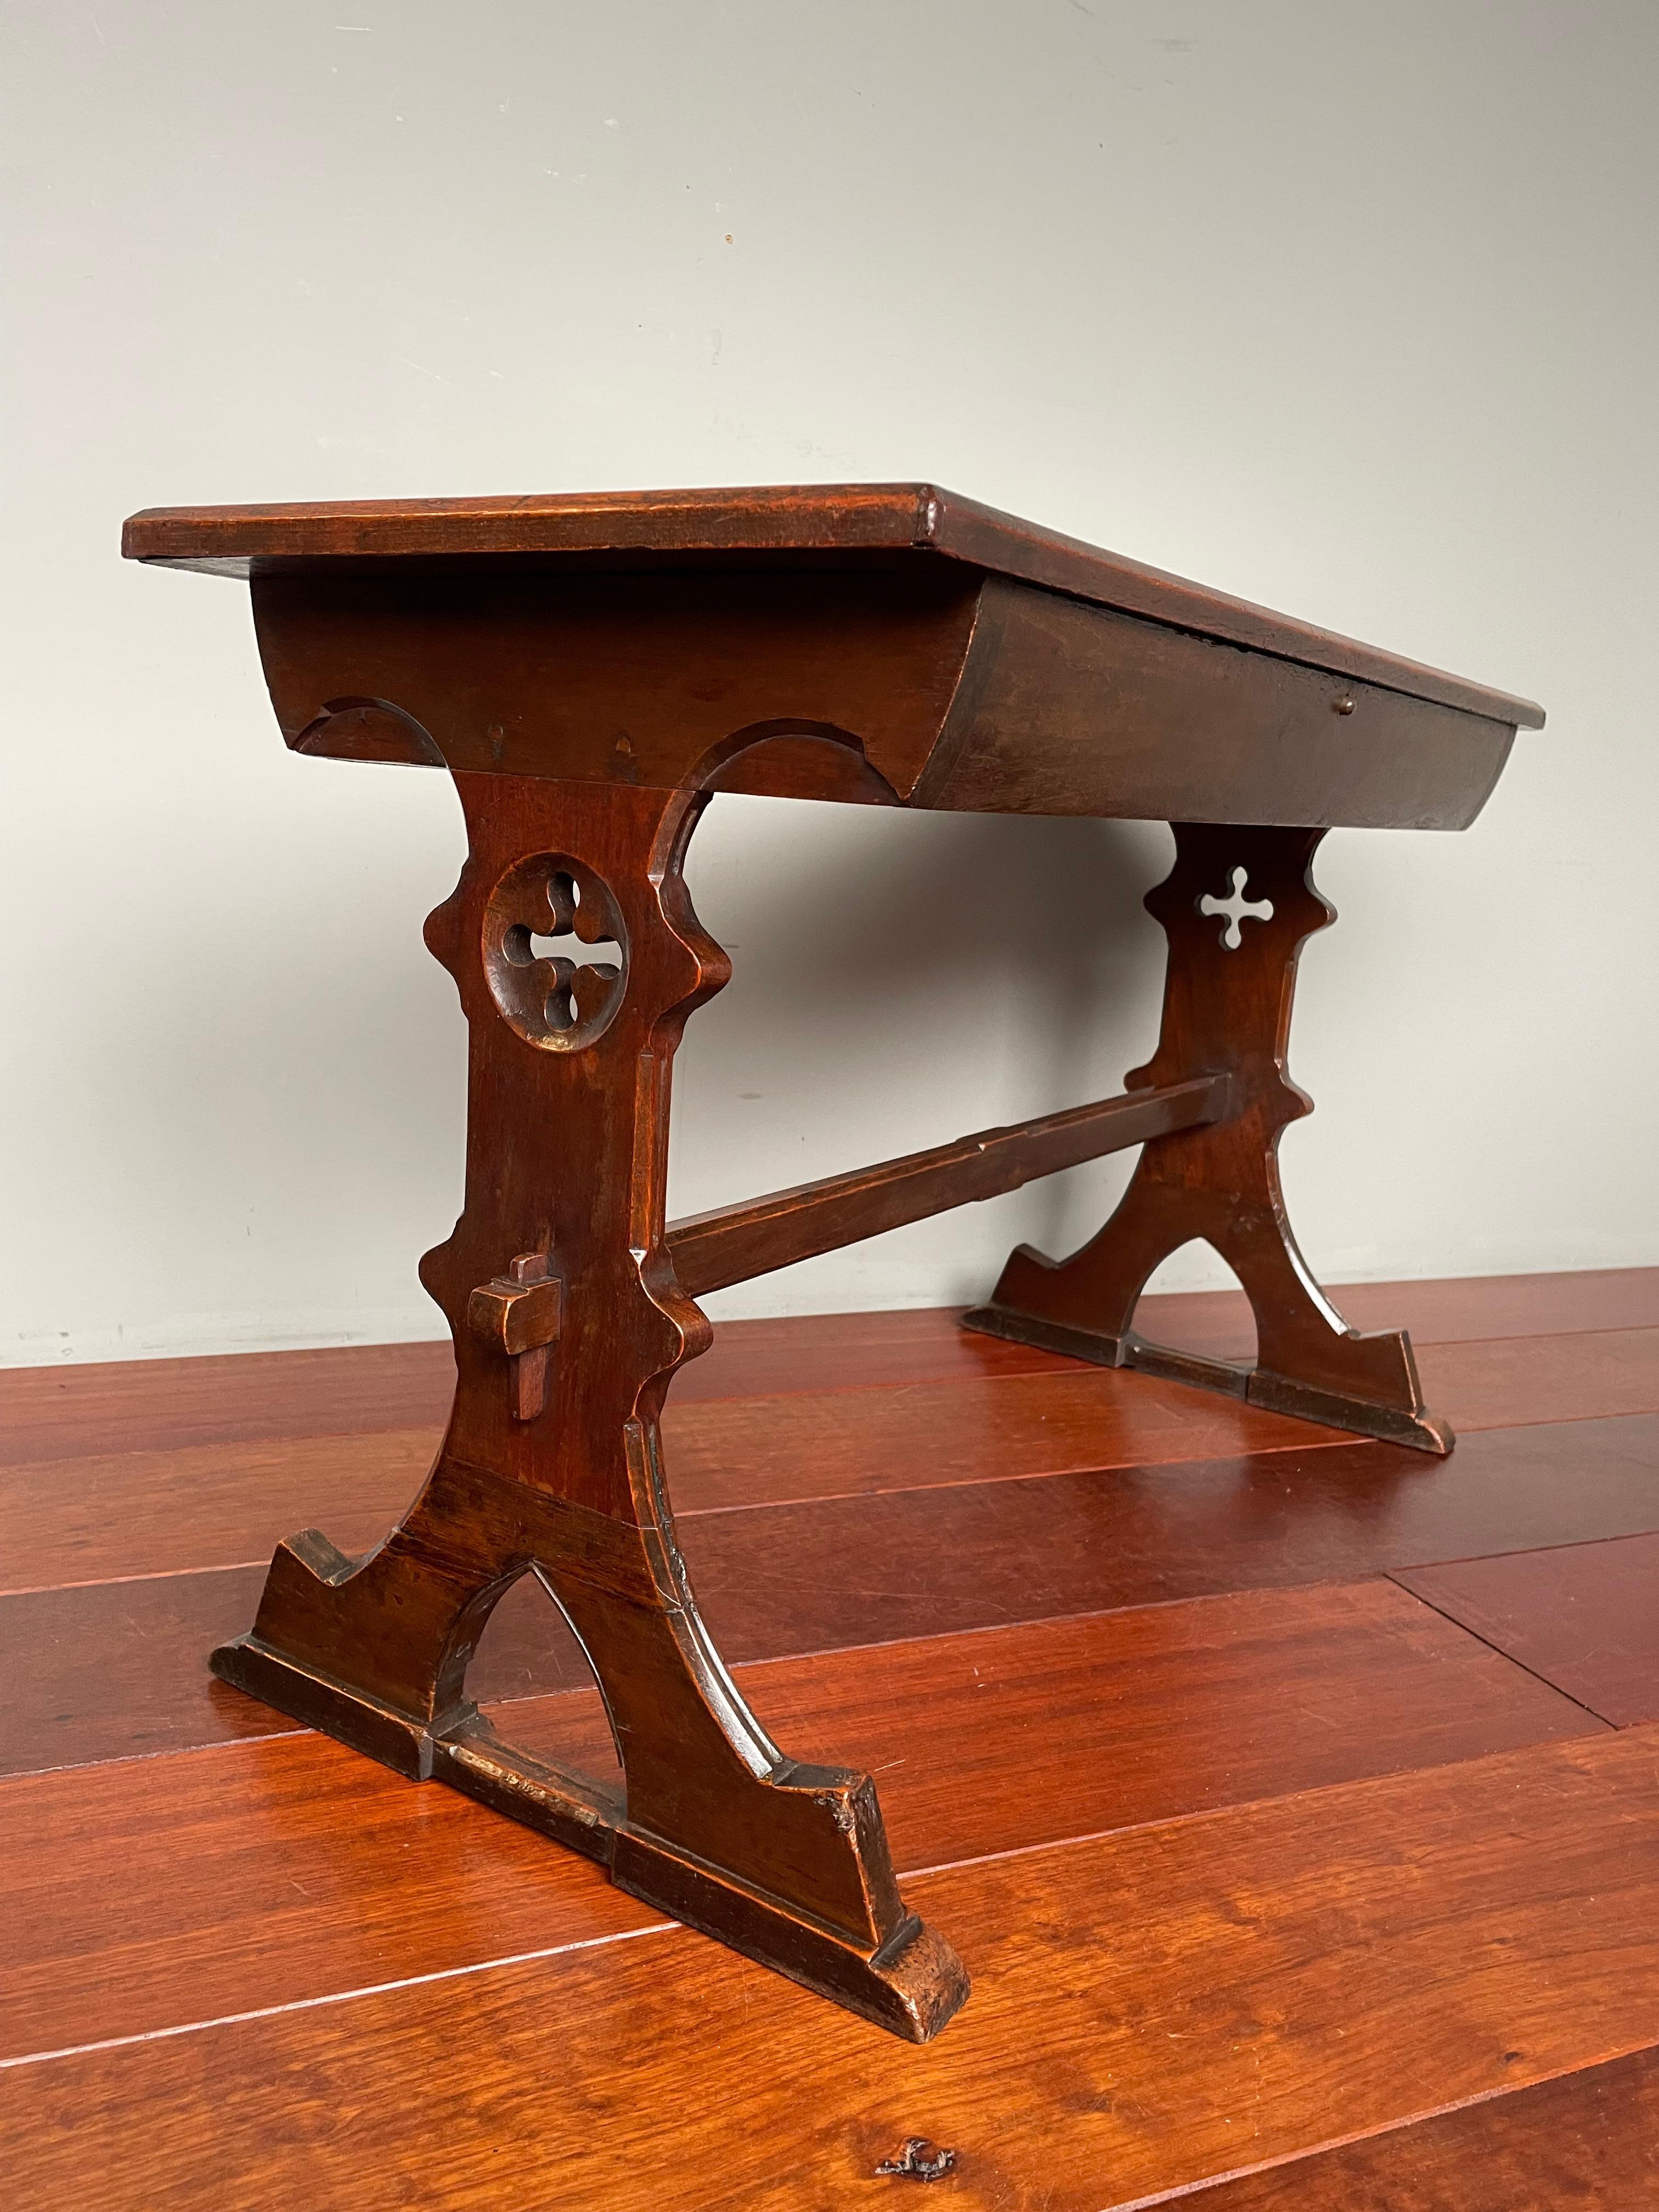 One of a kind and very special Gothic Style table from a former Dutch Colony.

If you are looking for a beautiful antique sidetable to grace your living space then this fine specimen from the early 1900s could be perfect for you. This remarkable